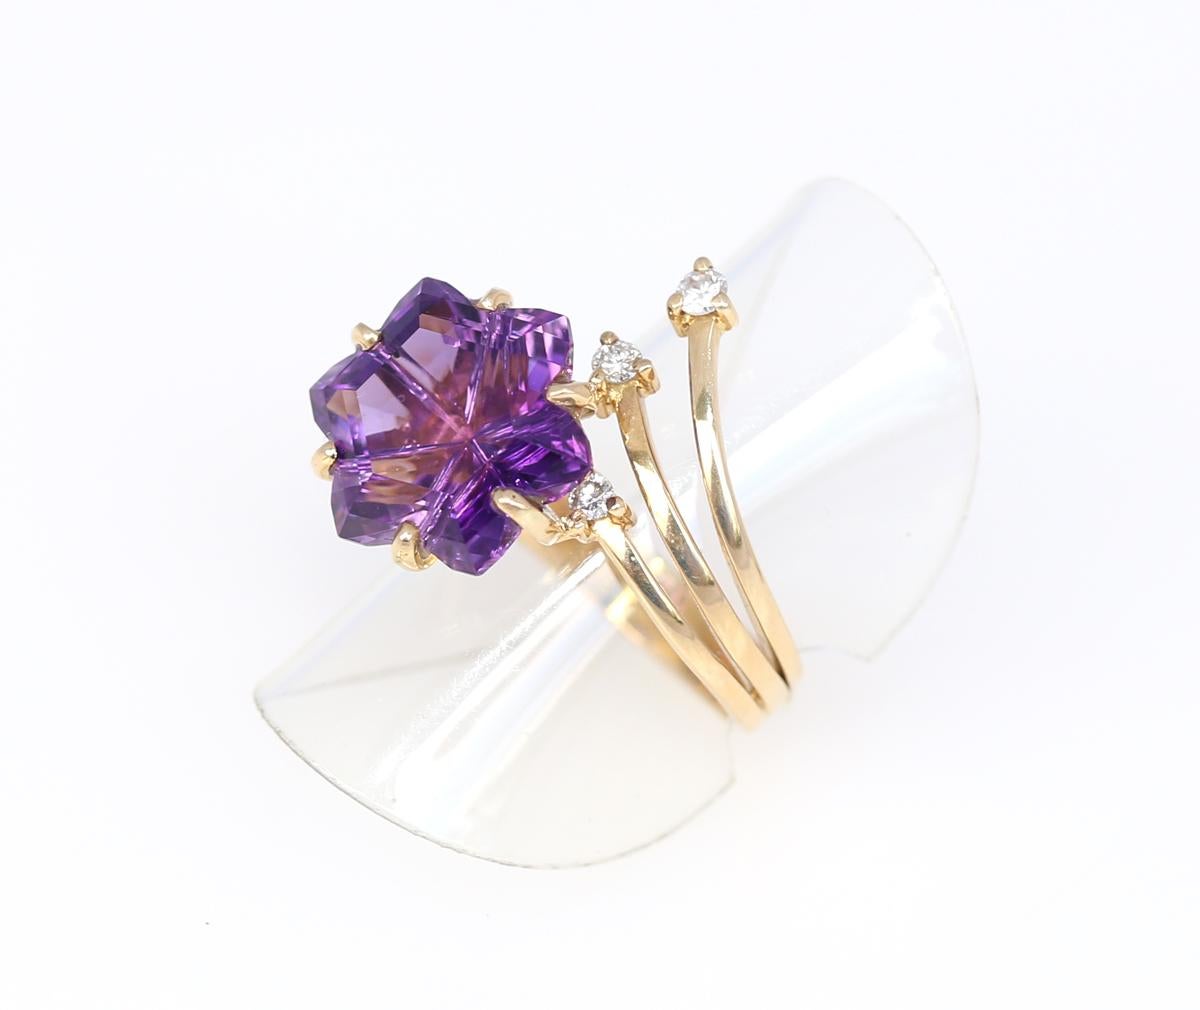 Amethyst Hexagon Diamonds Yellow Gold Forget Me Not Flower Ring in colors and symbol of  Armenian, 2010

Fine Amethyst hexagon shaped resembling a Forget Me Not Flower with three Diamonds each on separate stalks. 

Hand made in 2010 it represents